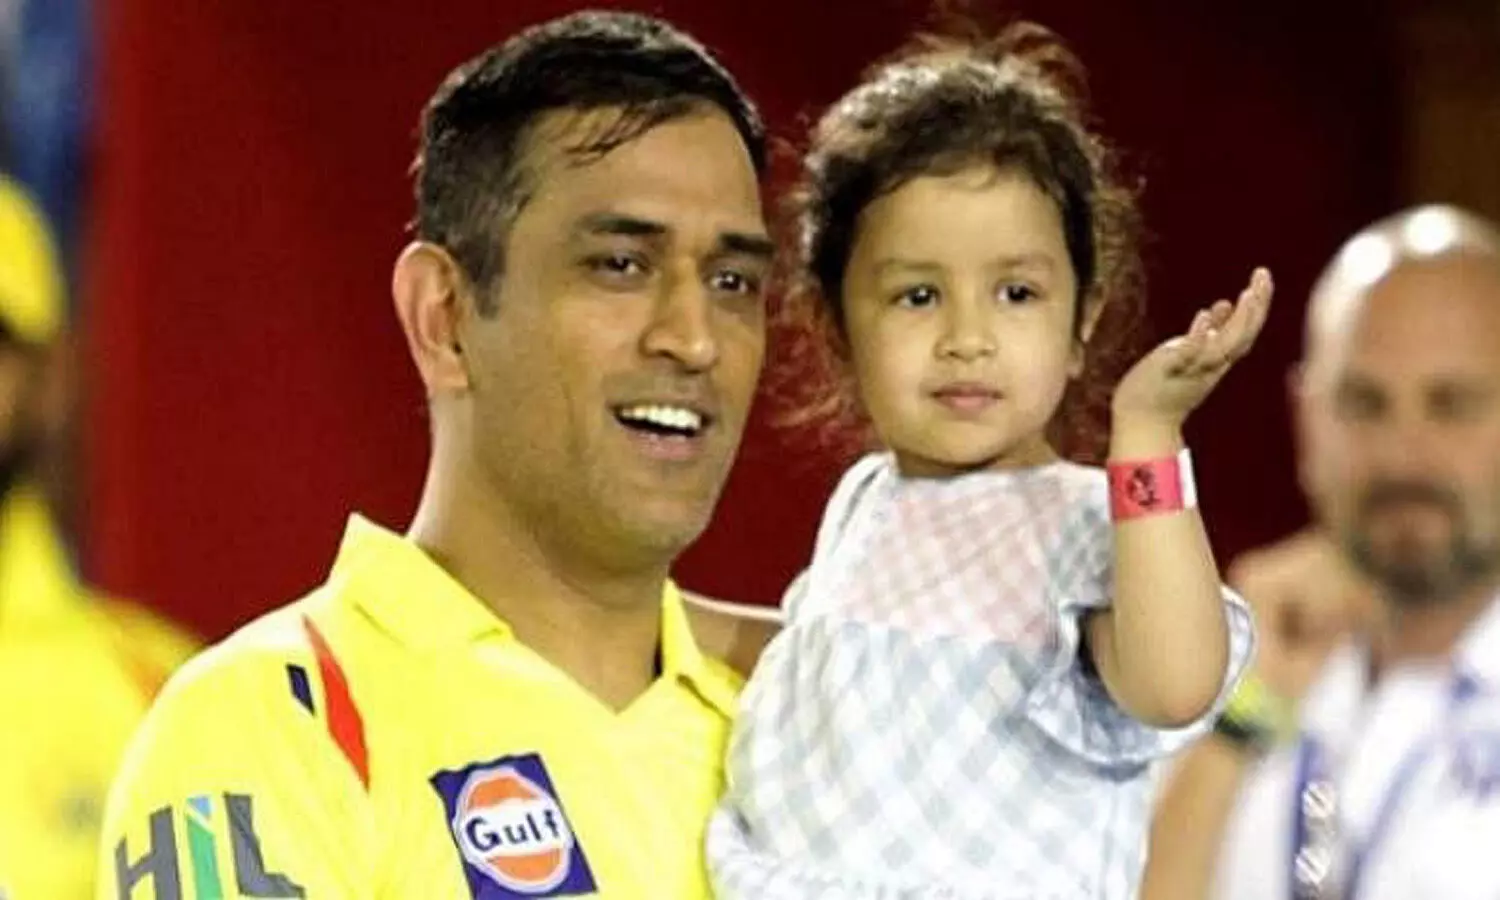 MS Dhoni finishes match with a SIX, wife Sakshi and daughter Ziva celebrate from stands